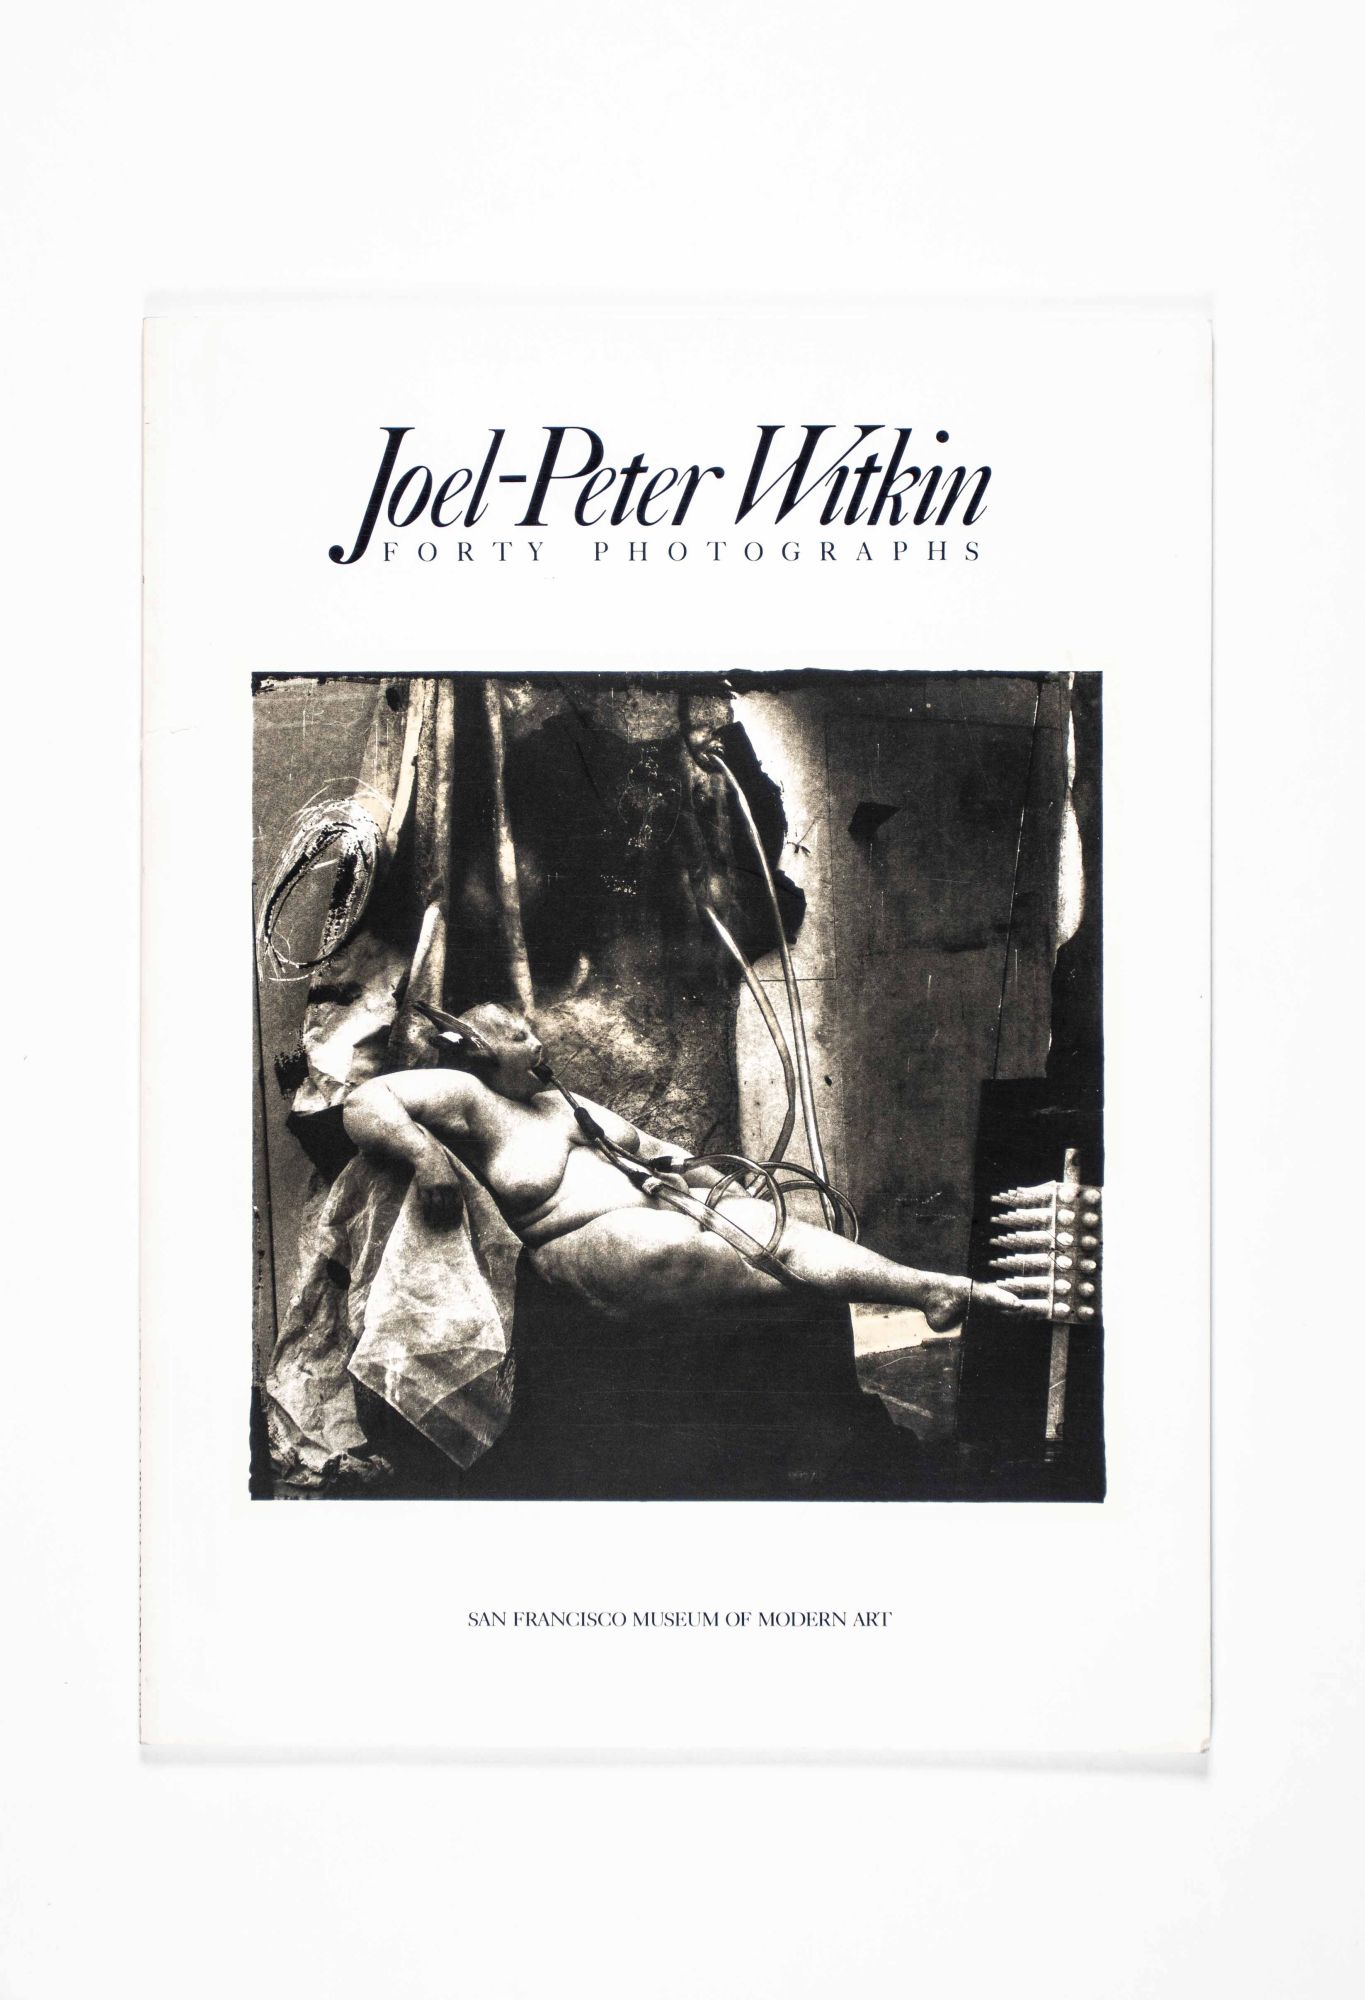 Joel-Peter Witkin [FORTY PHOTOGRAPHY] - 通販 - gofukuyasan.com